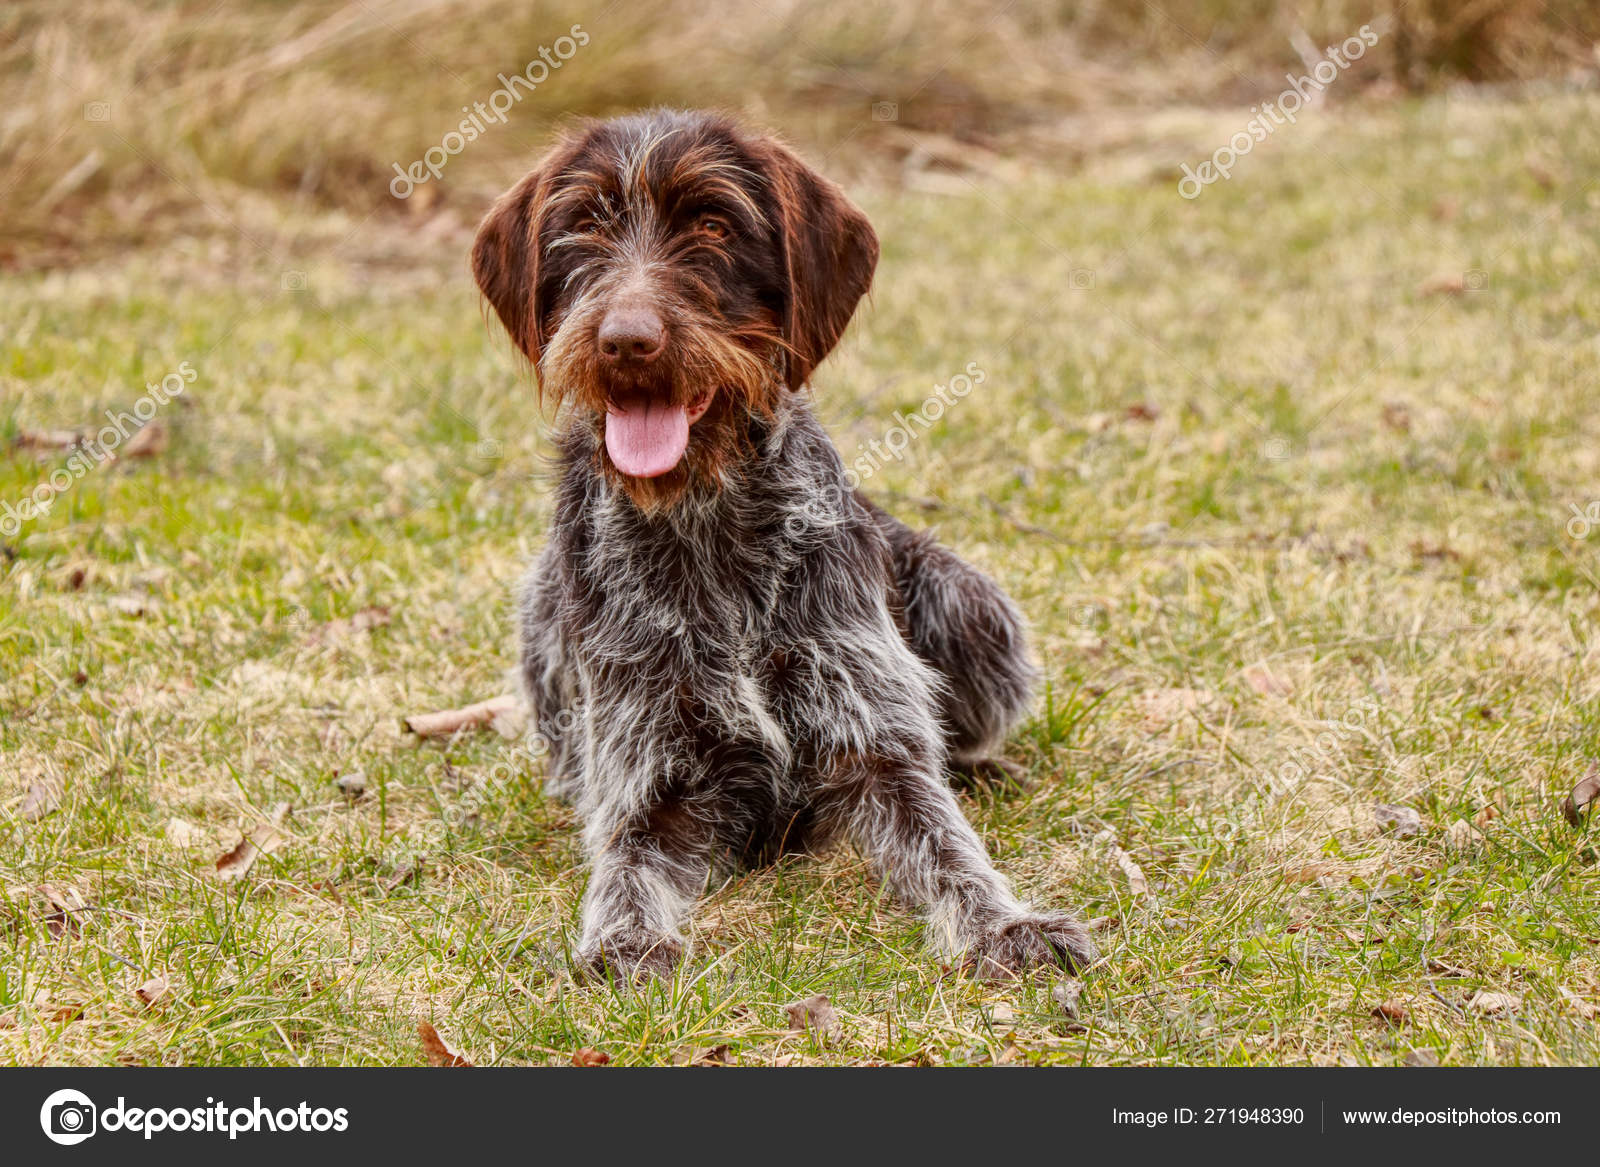 Happy Animal Face In Grass Cesky Fousek Czech Pointer Smiles At The Whole World Total Relax After Long Run Playful Puppy With Tongue Out Resting On The Garden Stock Photo C